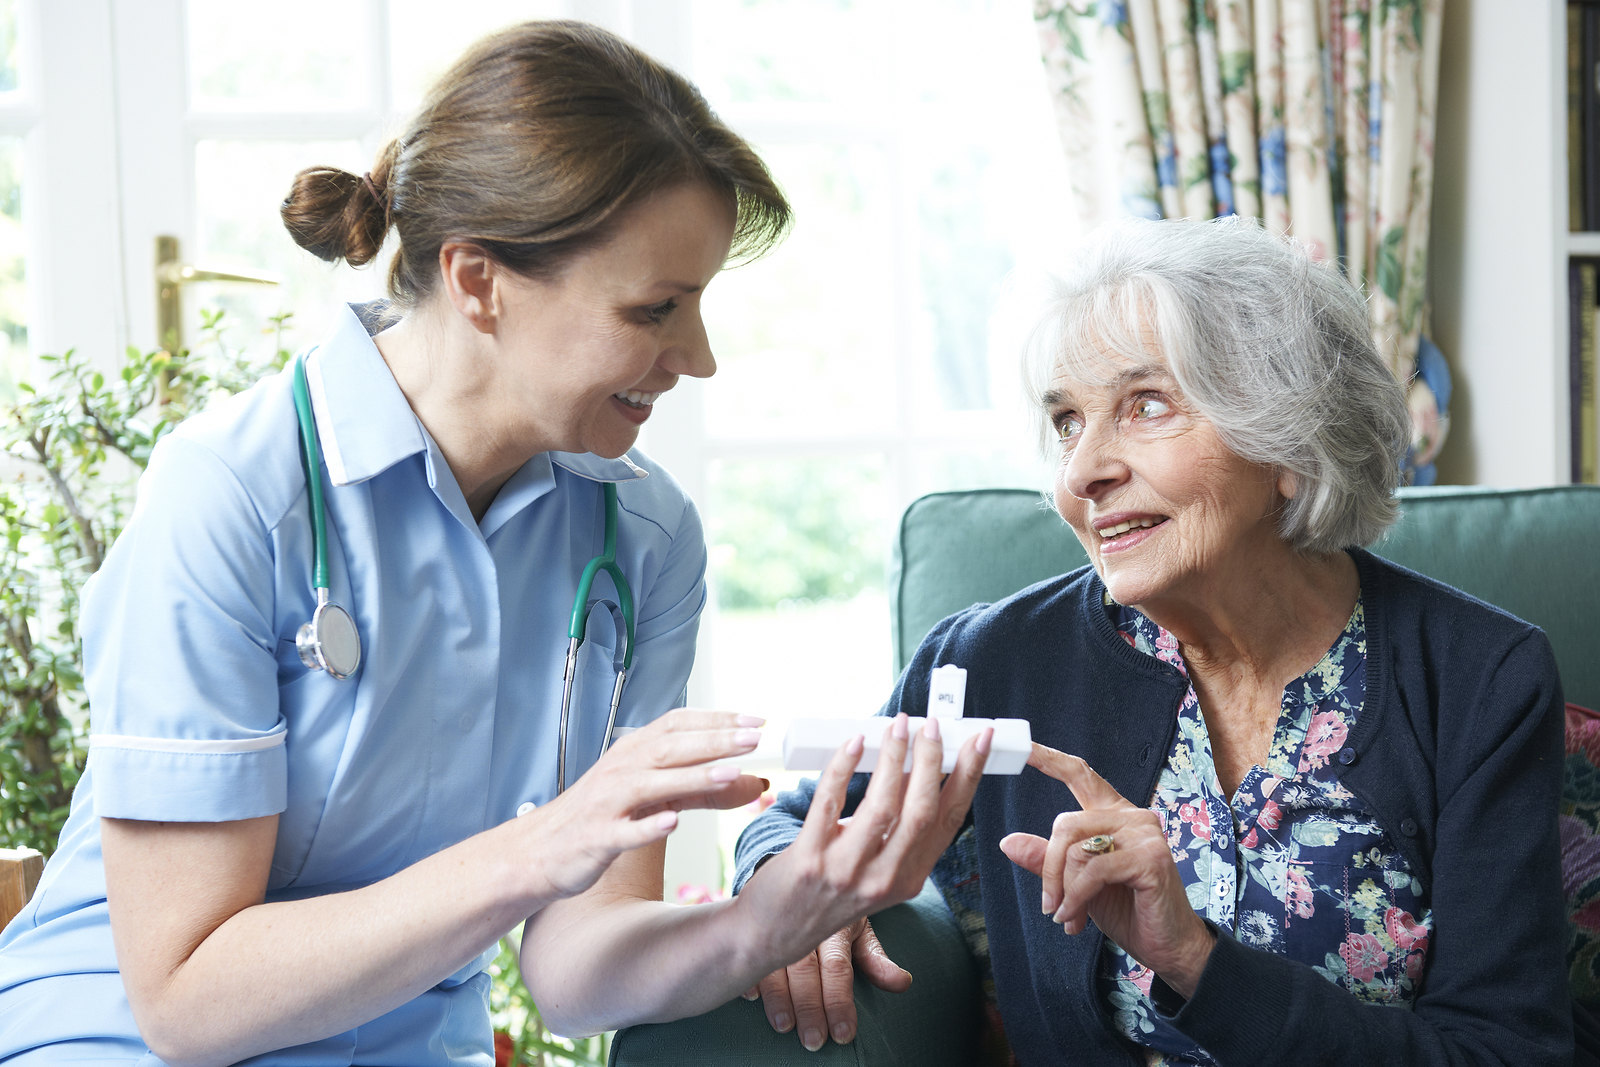 A visiting nurse helps an elderly woman with her medication.